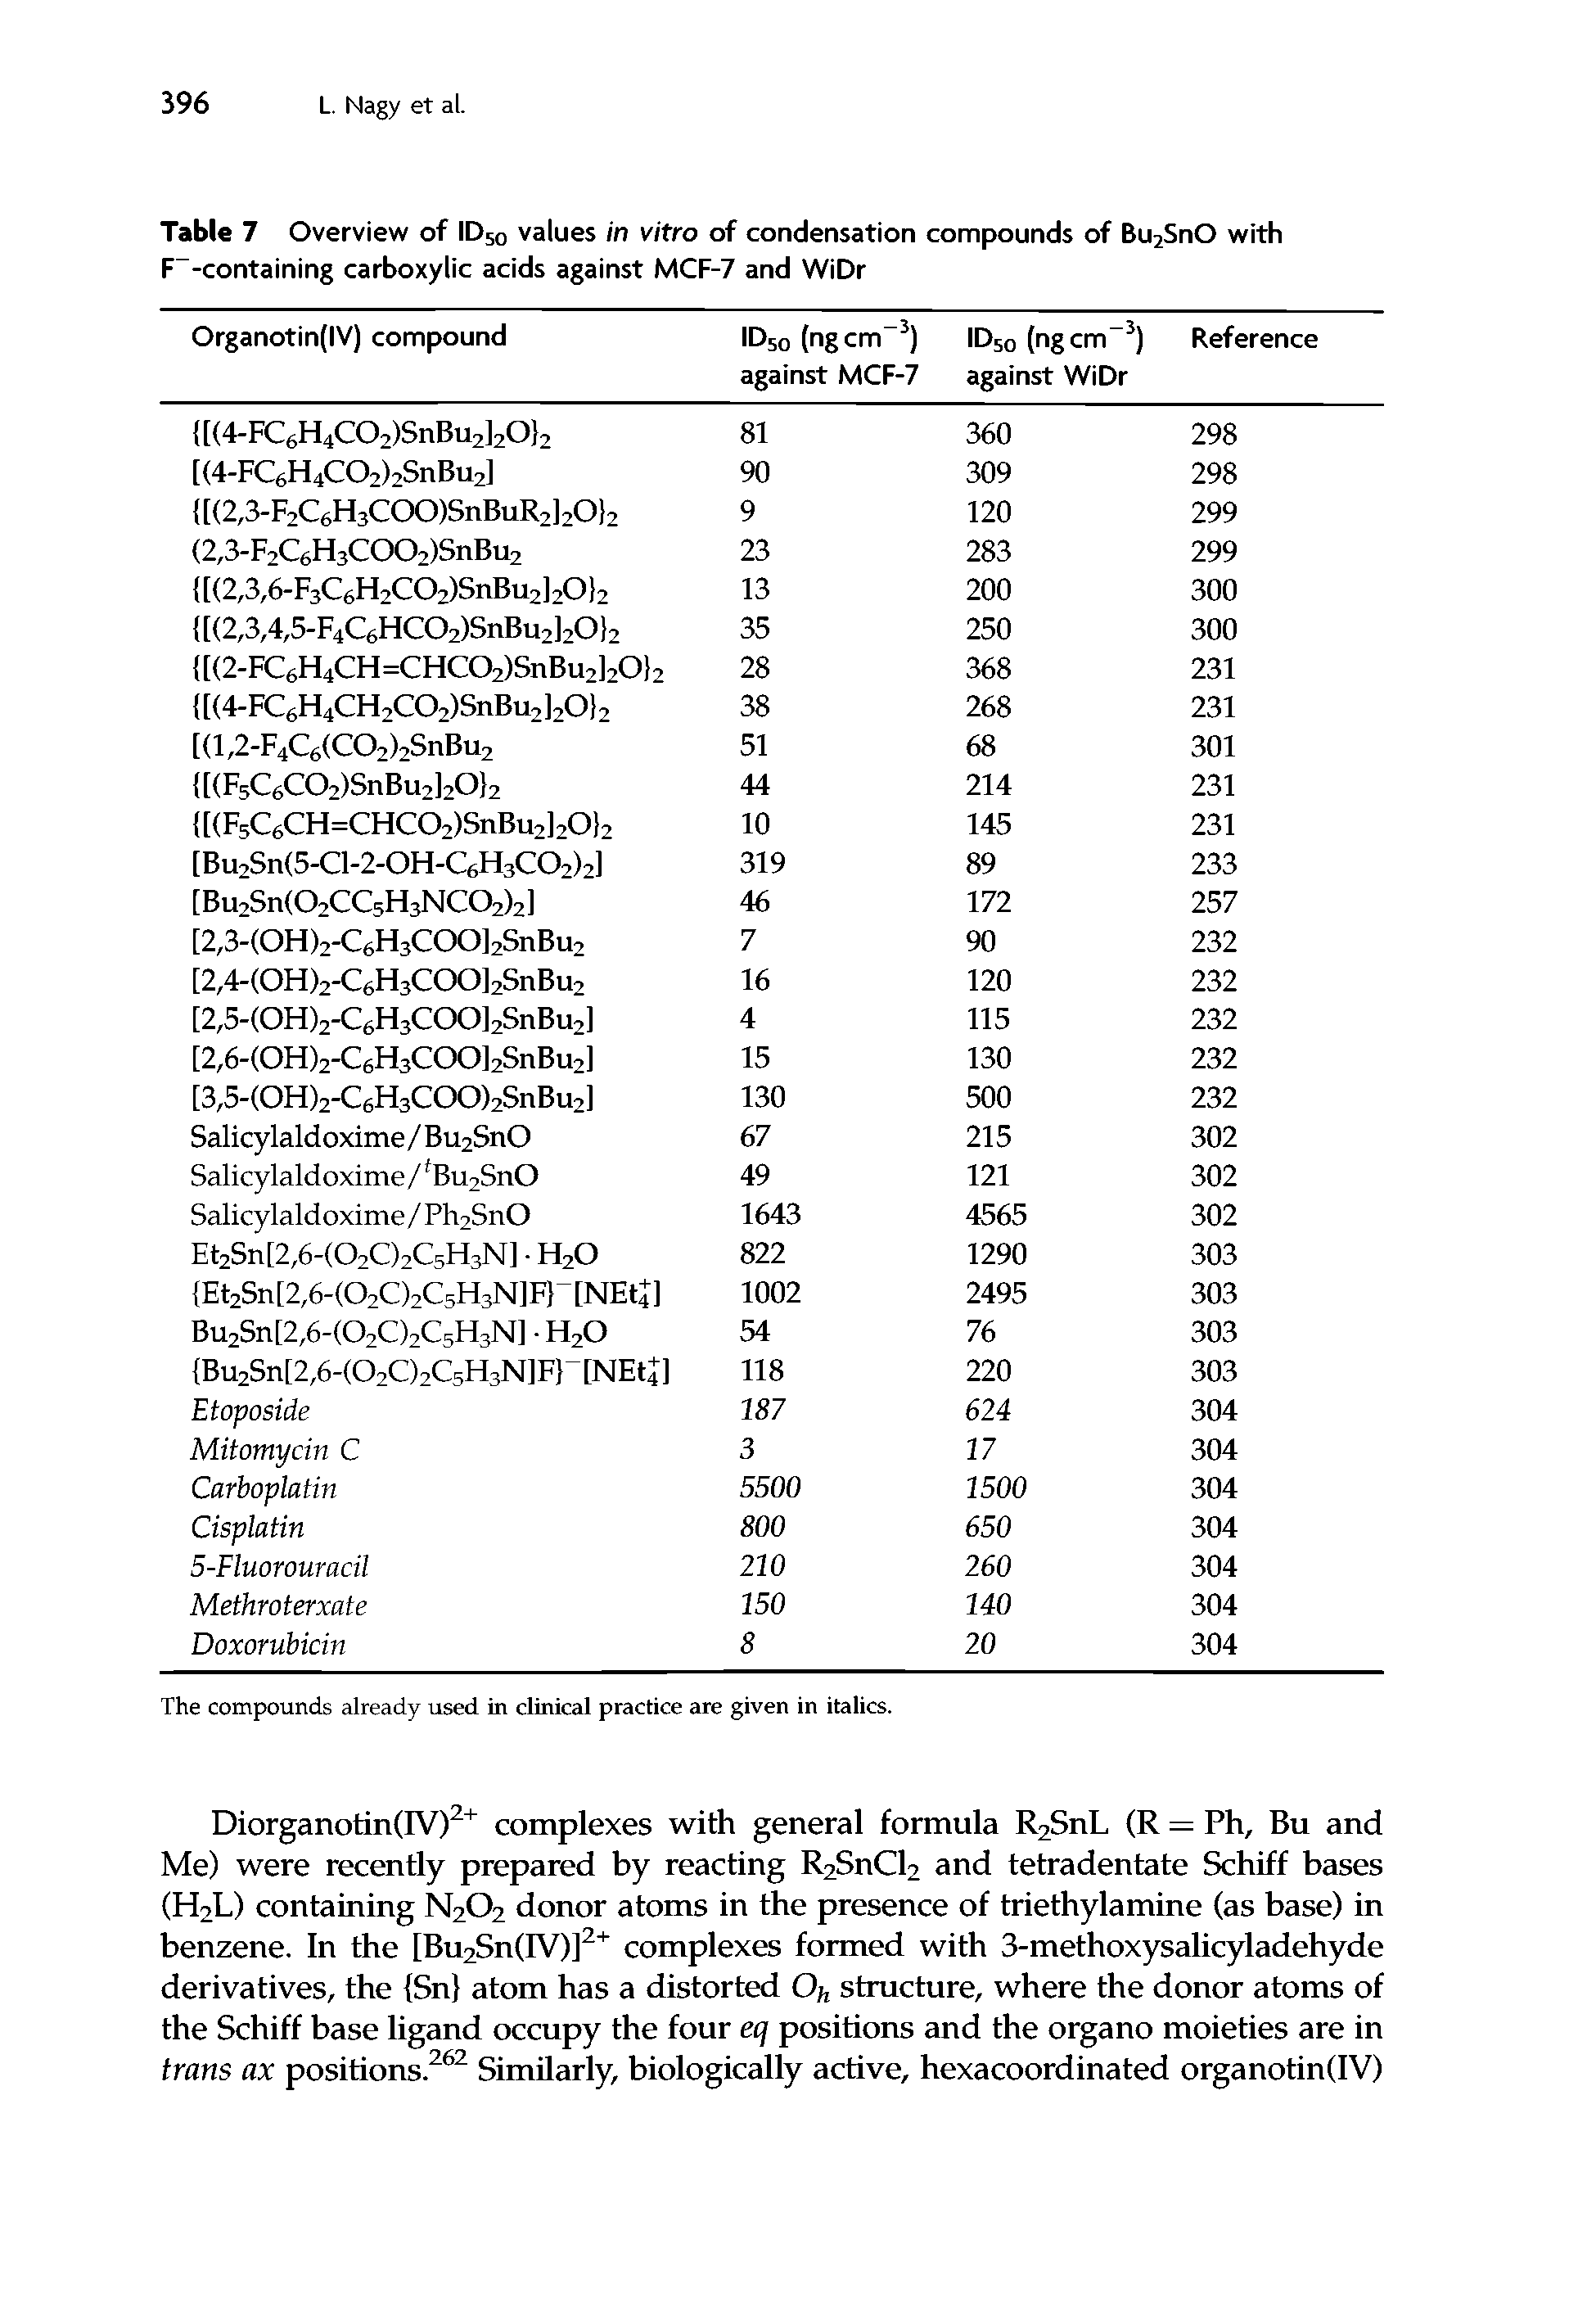 Table 7 Overview of ID50 values in vitro of condensation compounds of Bu2SnO with F -containing carboxylic acids against MCF-7 and WiDr...